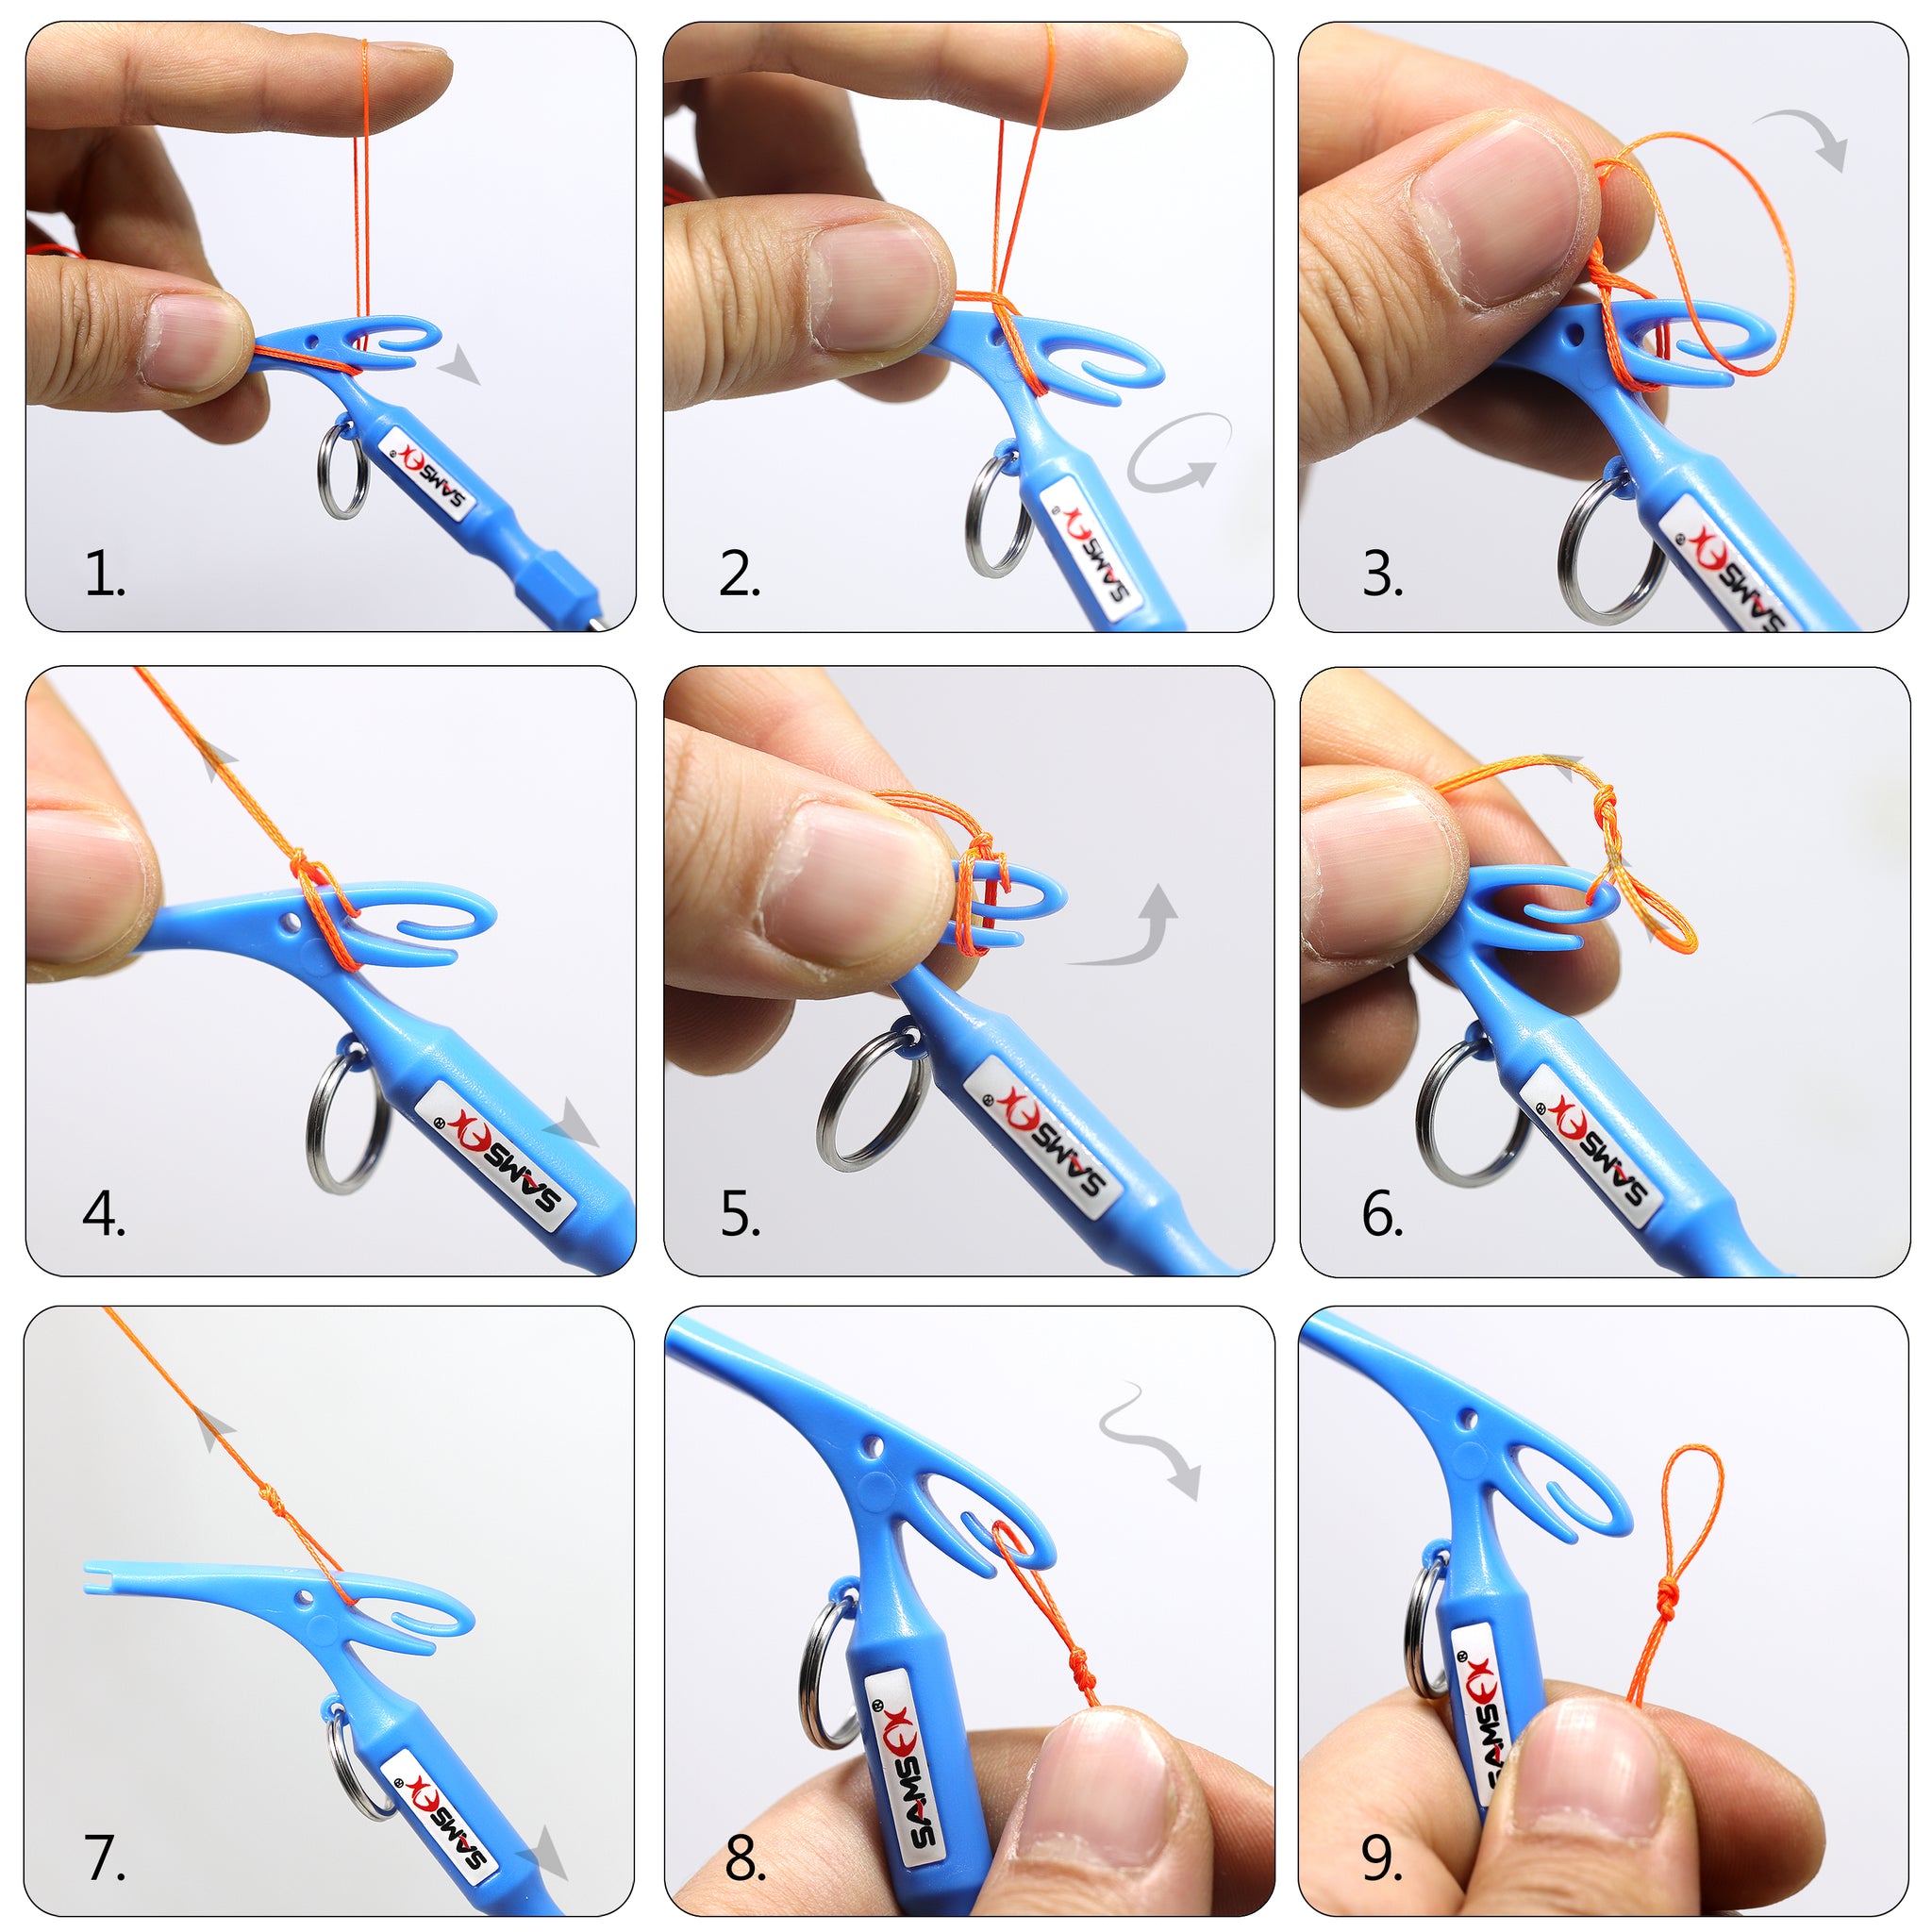 Fishing Knot Tying Tool - Hook Tie Tool To Tie Knots Quick - Quick